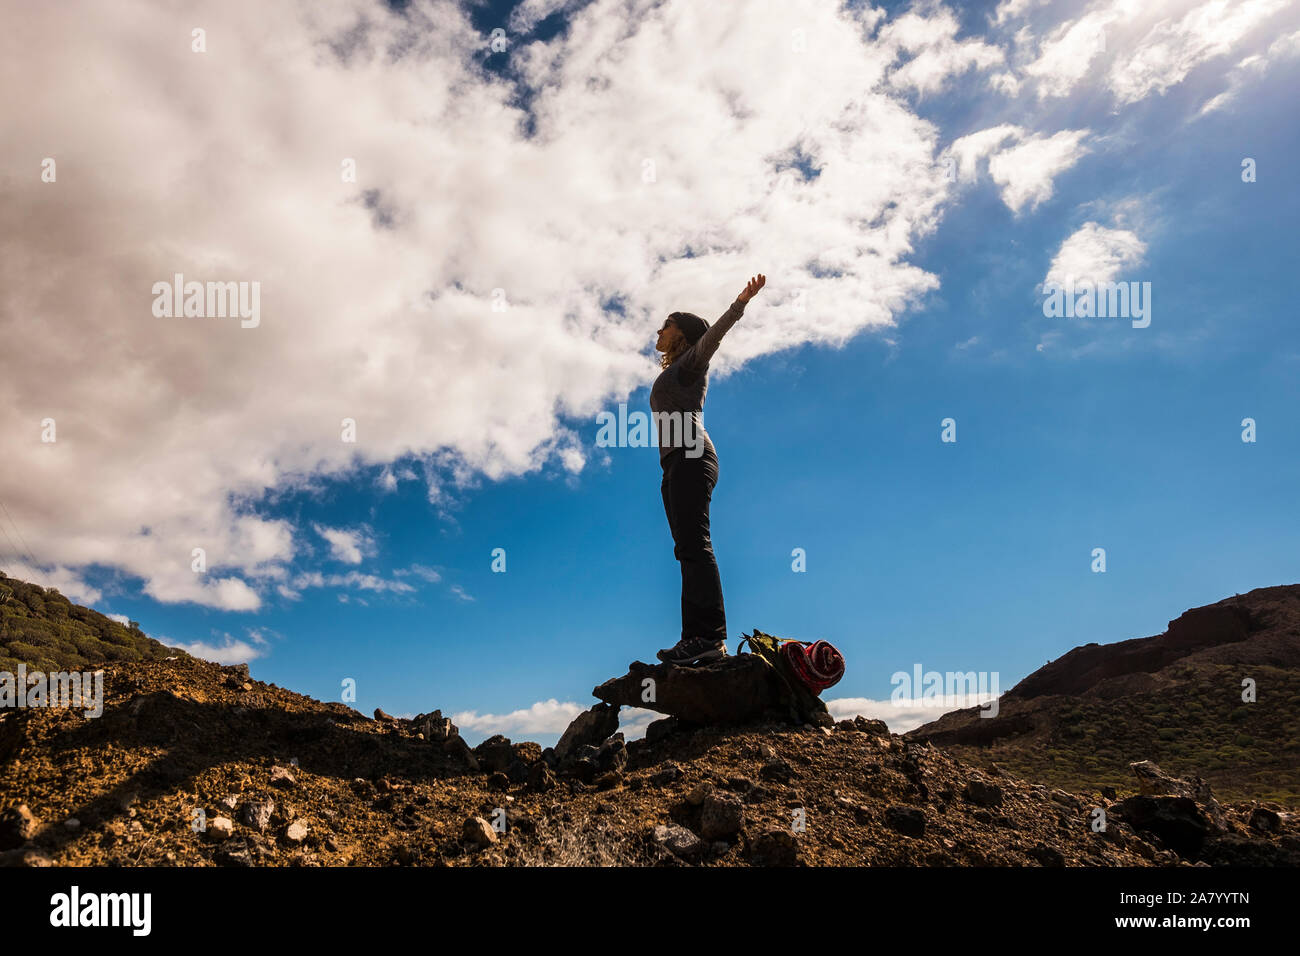 People having success in healthy outdoor leisure activity - trekking and adventure on mountains - standing woman with open arms enjoying freedom - blu Stock Photo